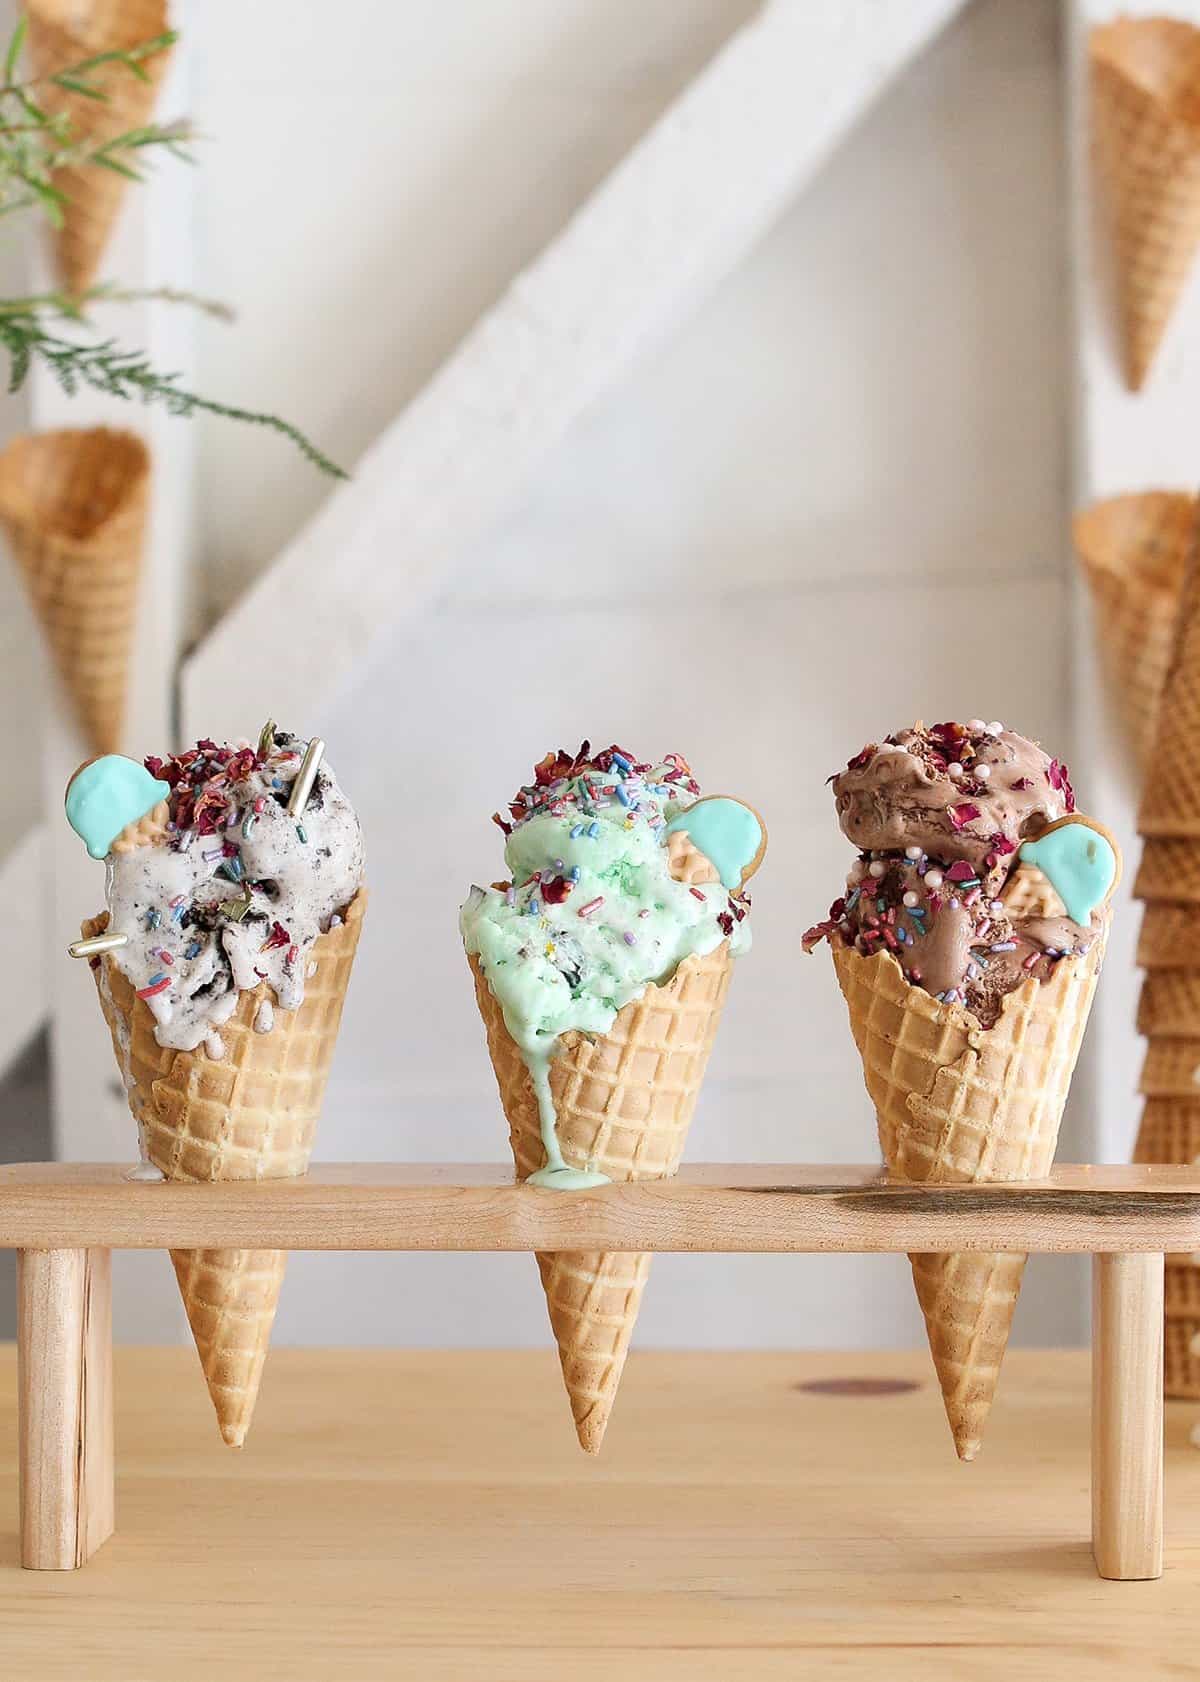 Three colorful ice cream cones in a wooden cone holder with sprinkles on the top of them.